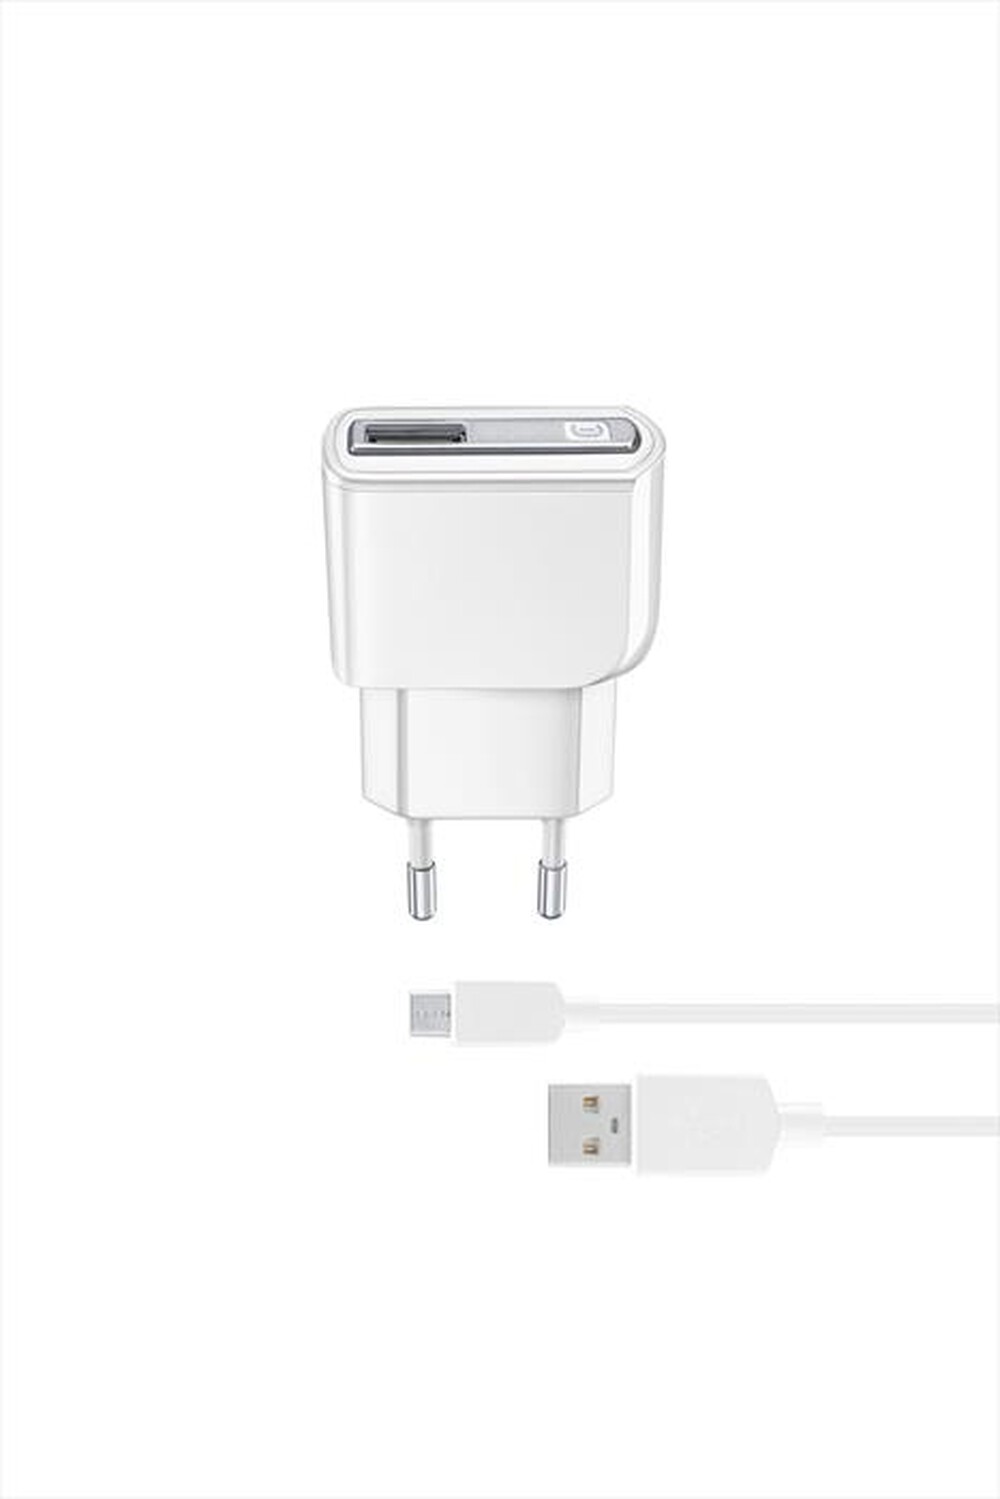 "CELLULARLINE - USB Charger Compact Kit - Bianco"